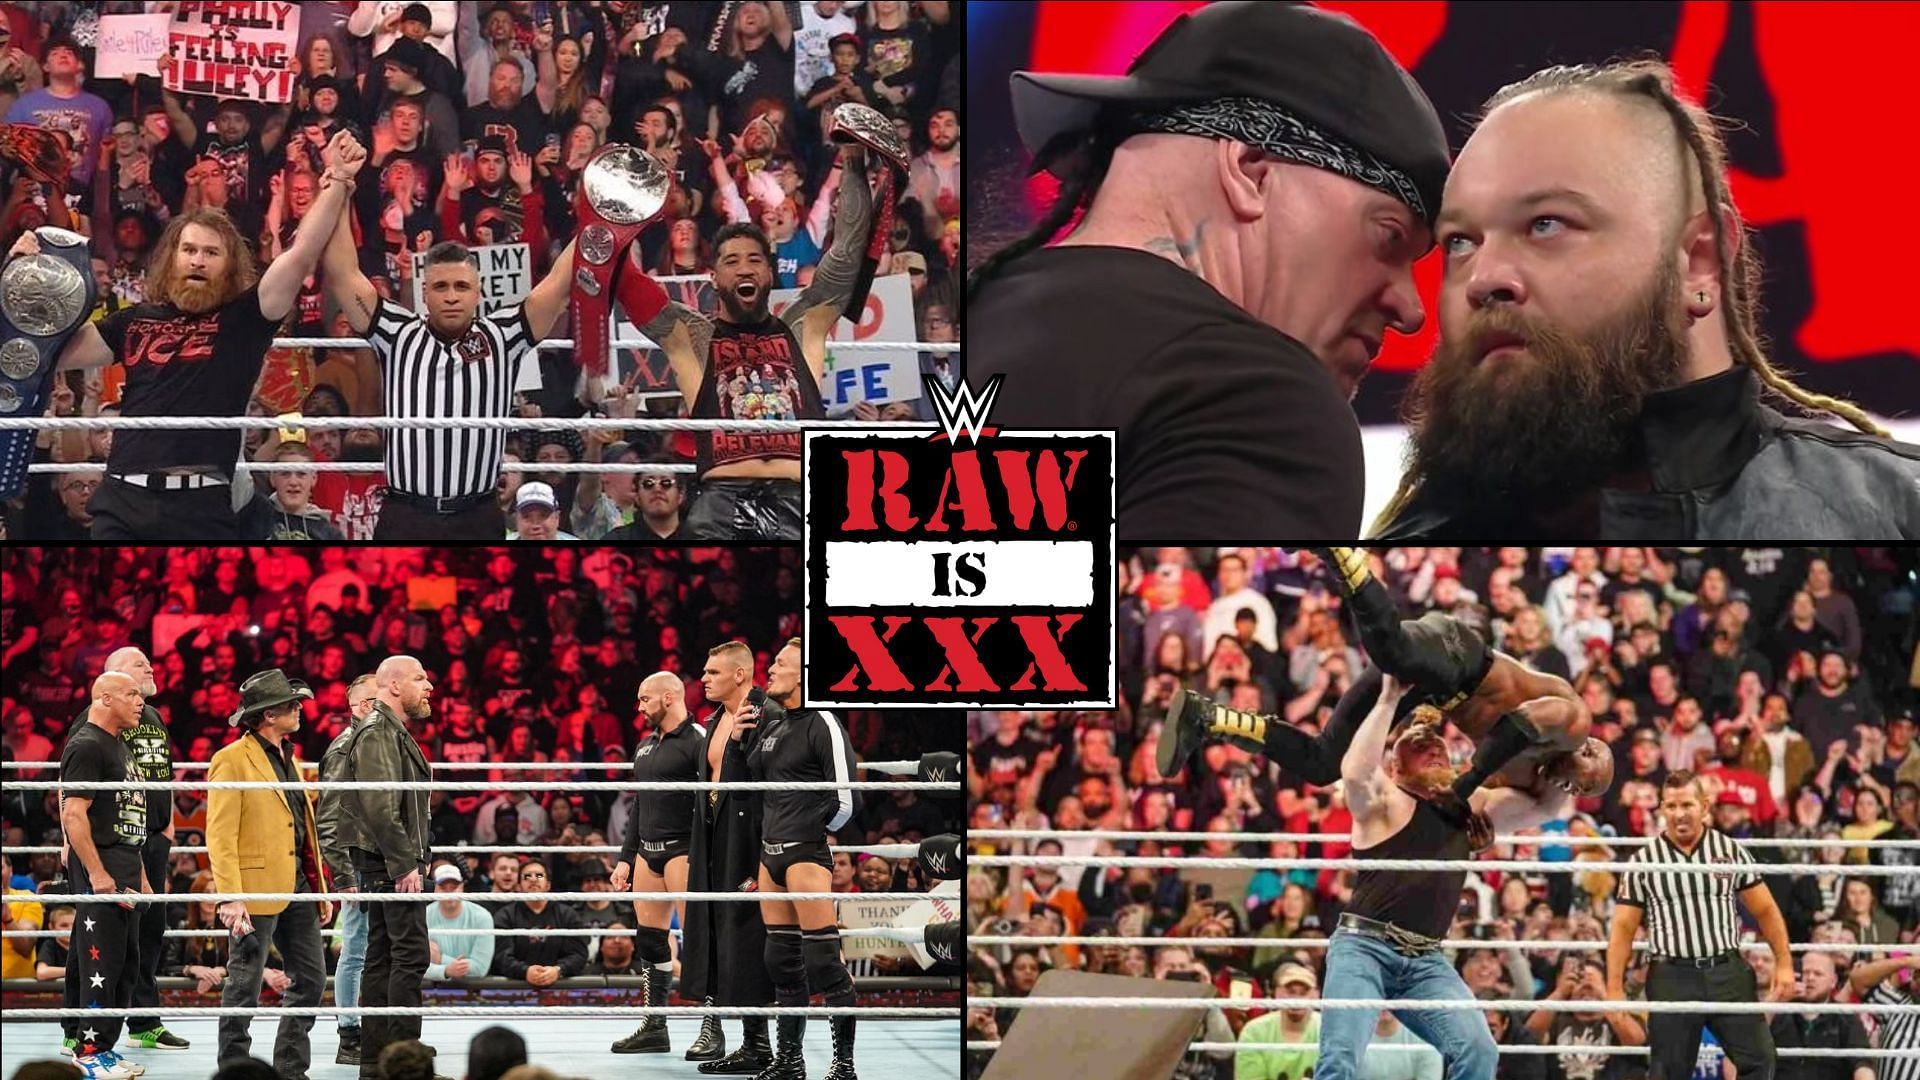 WWE RAW XXX was a blast for fans of the product